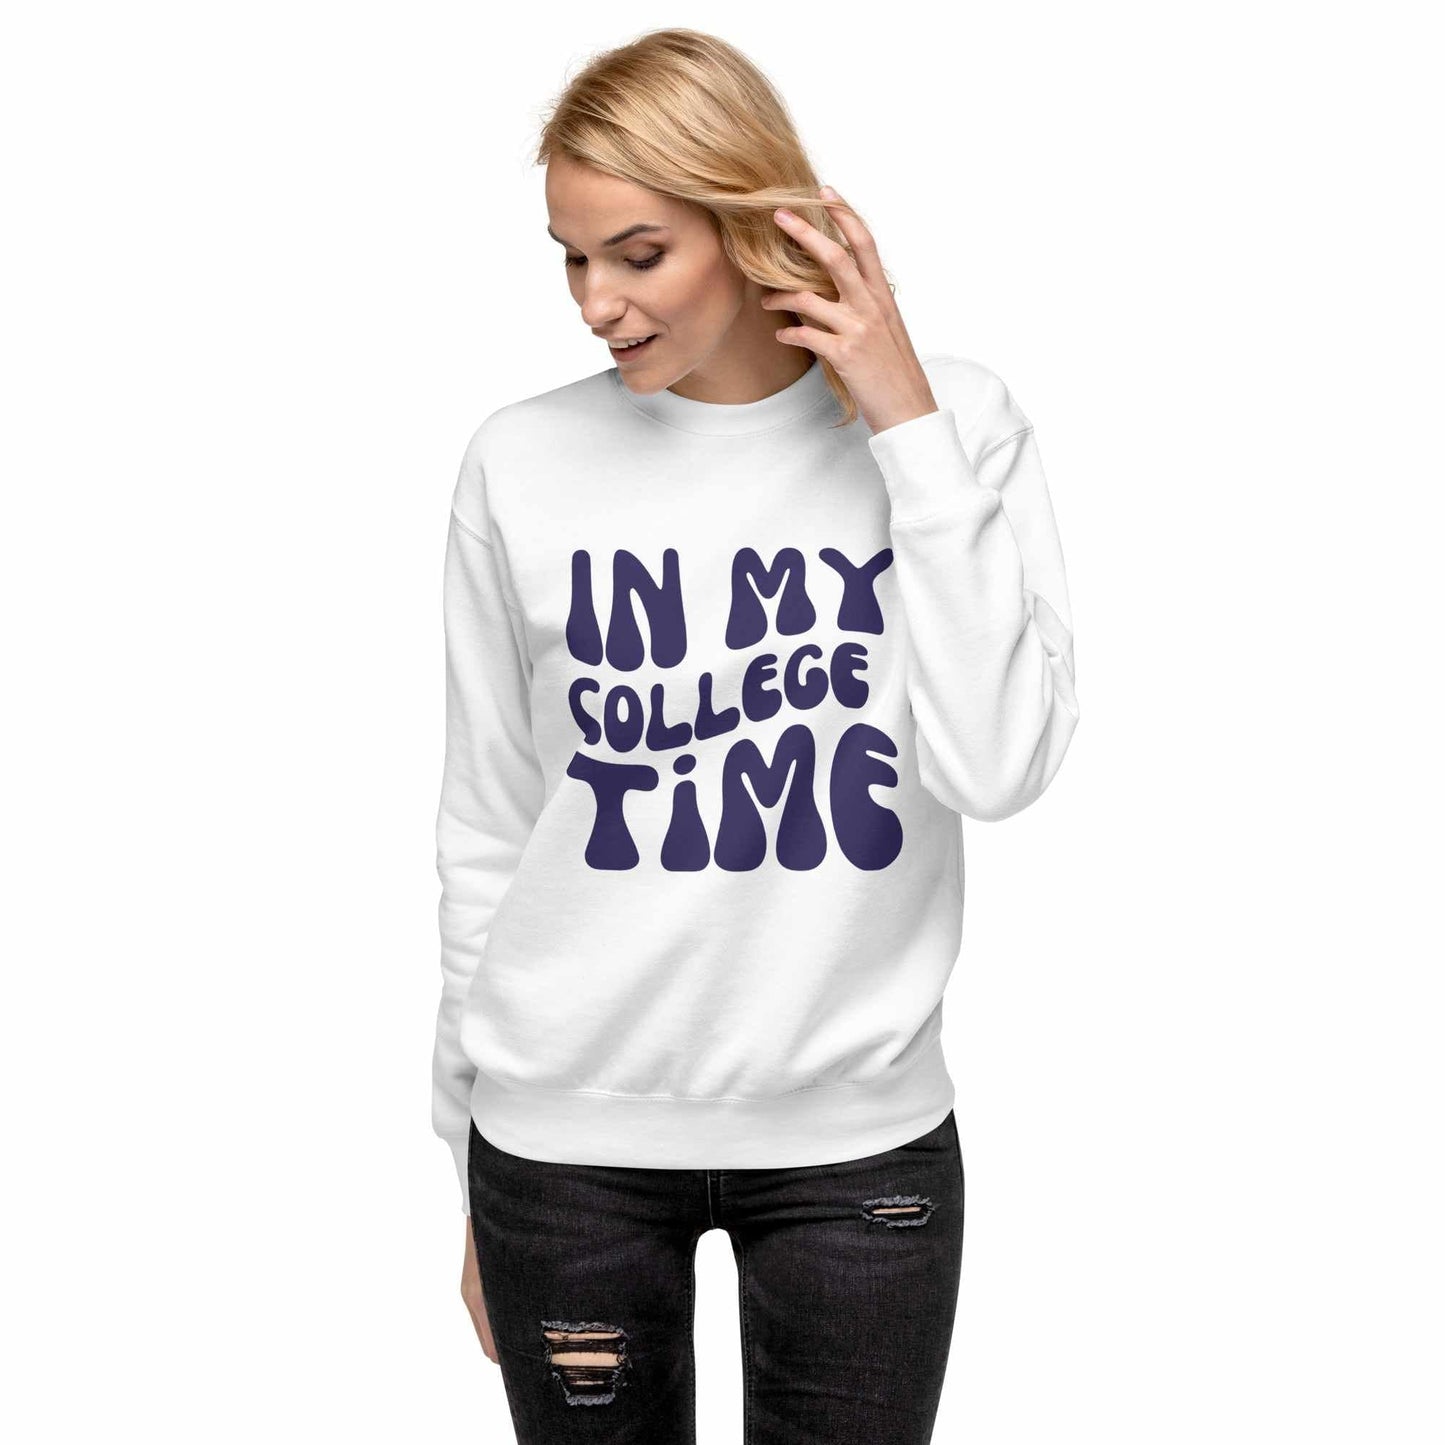 Custom Sweatshirt for Students - Personalize Your Style at Neleti.com